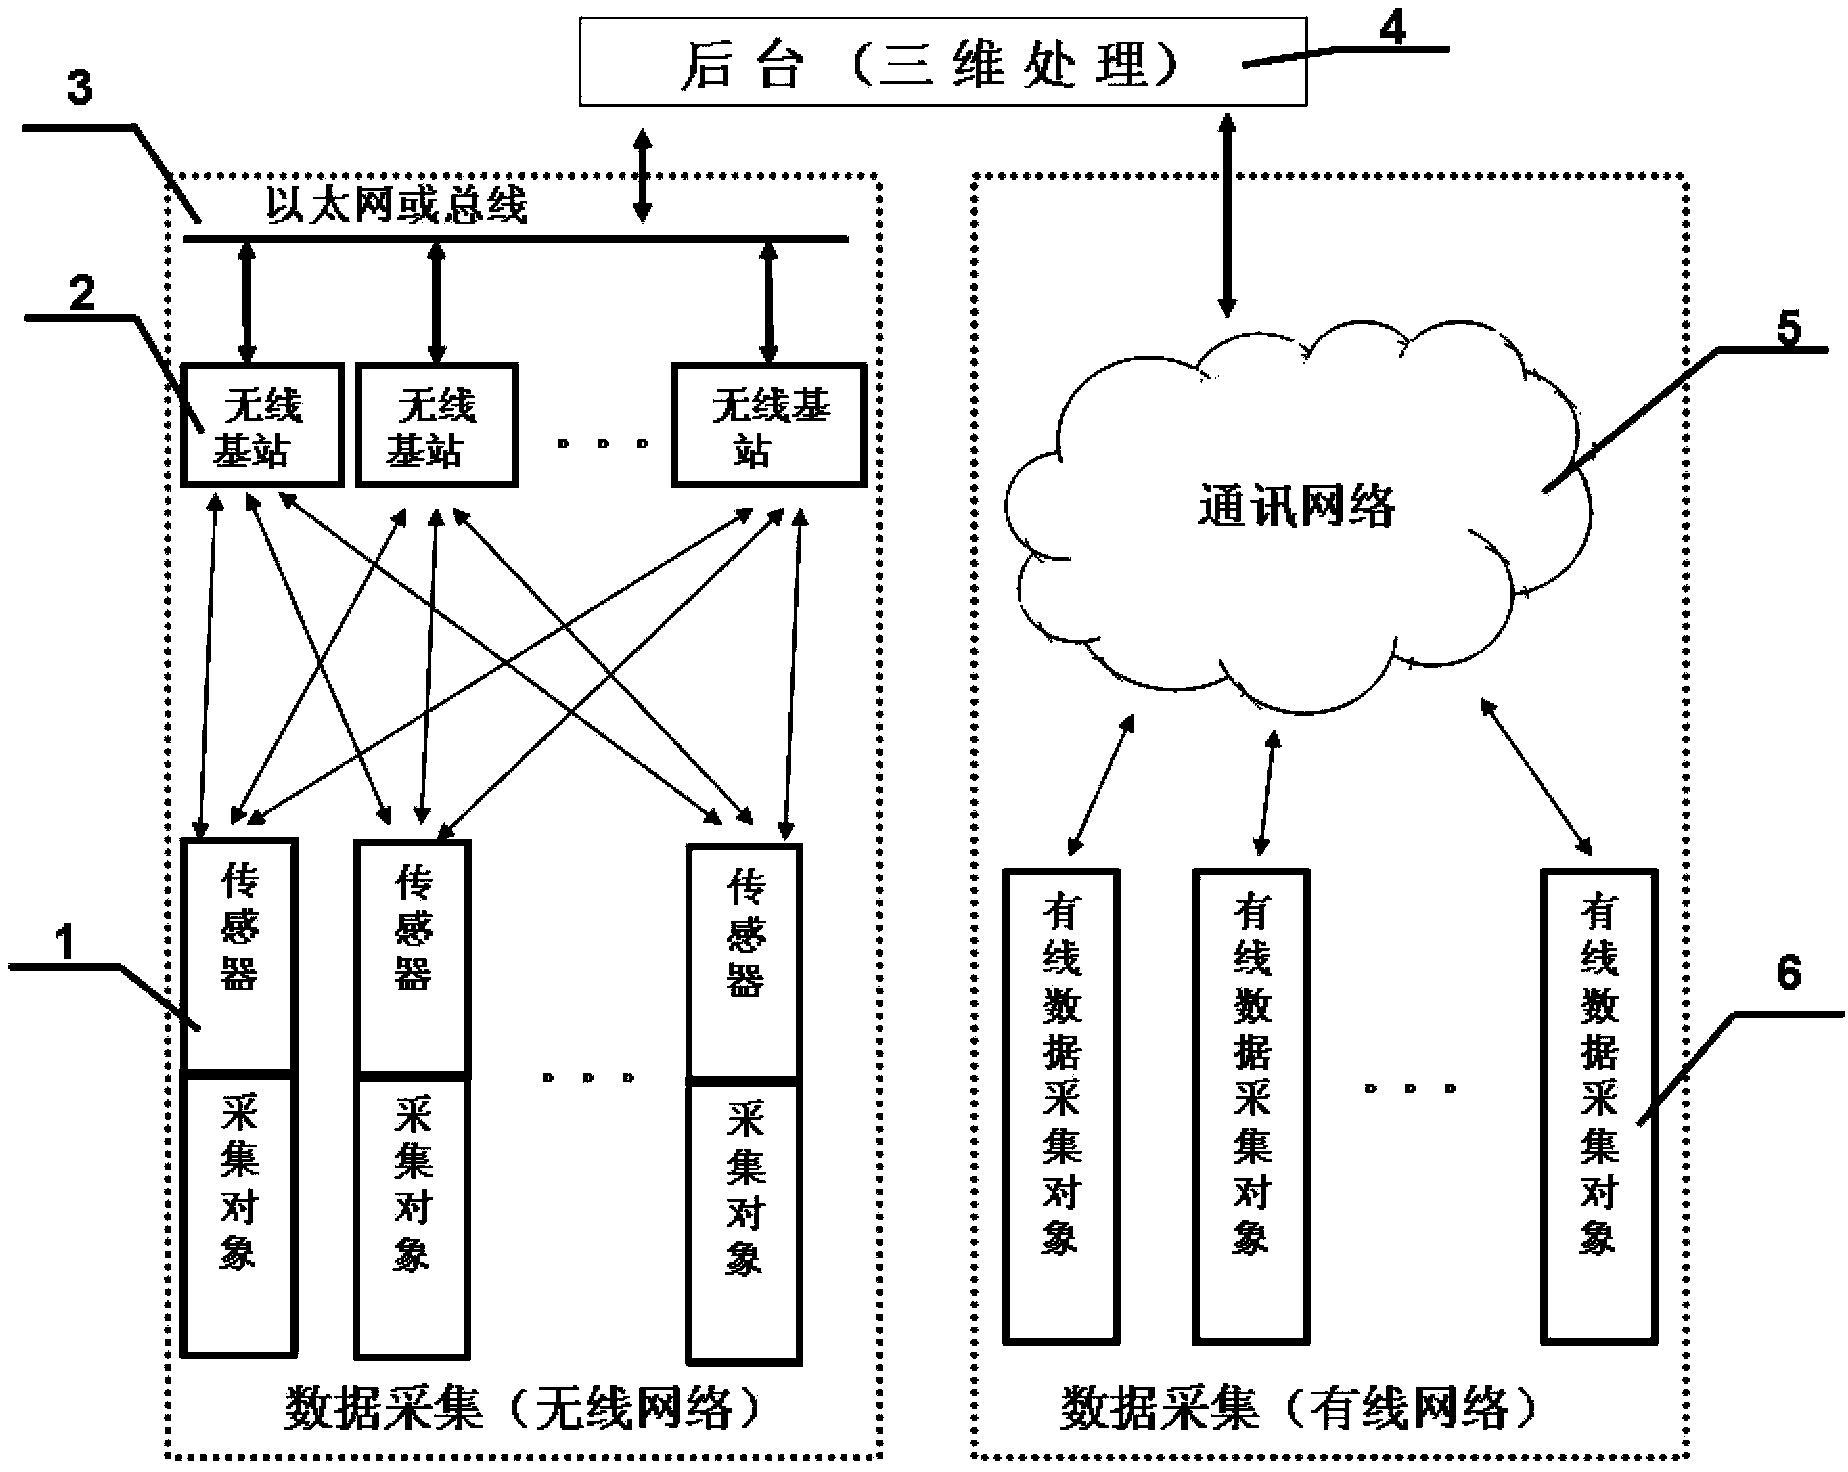 Method of data center dynamic environment monitoring system on basis of IOT (Internet Of Things) technology